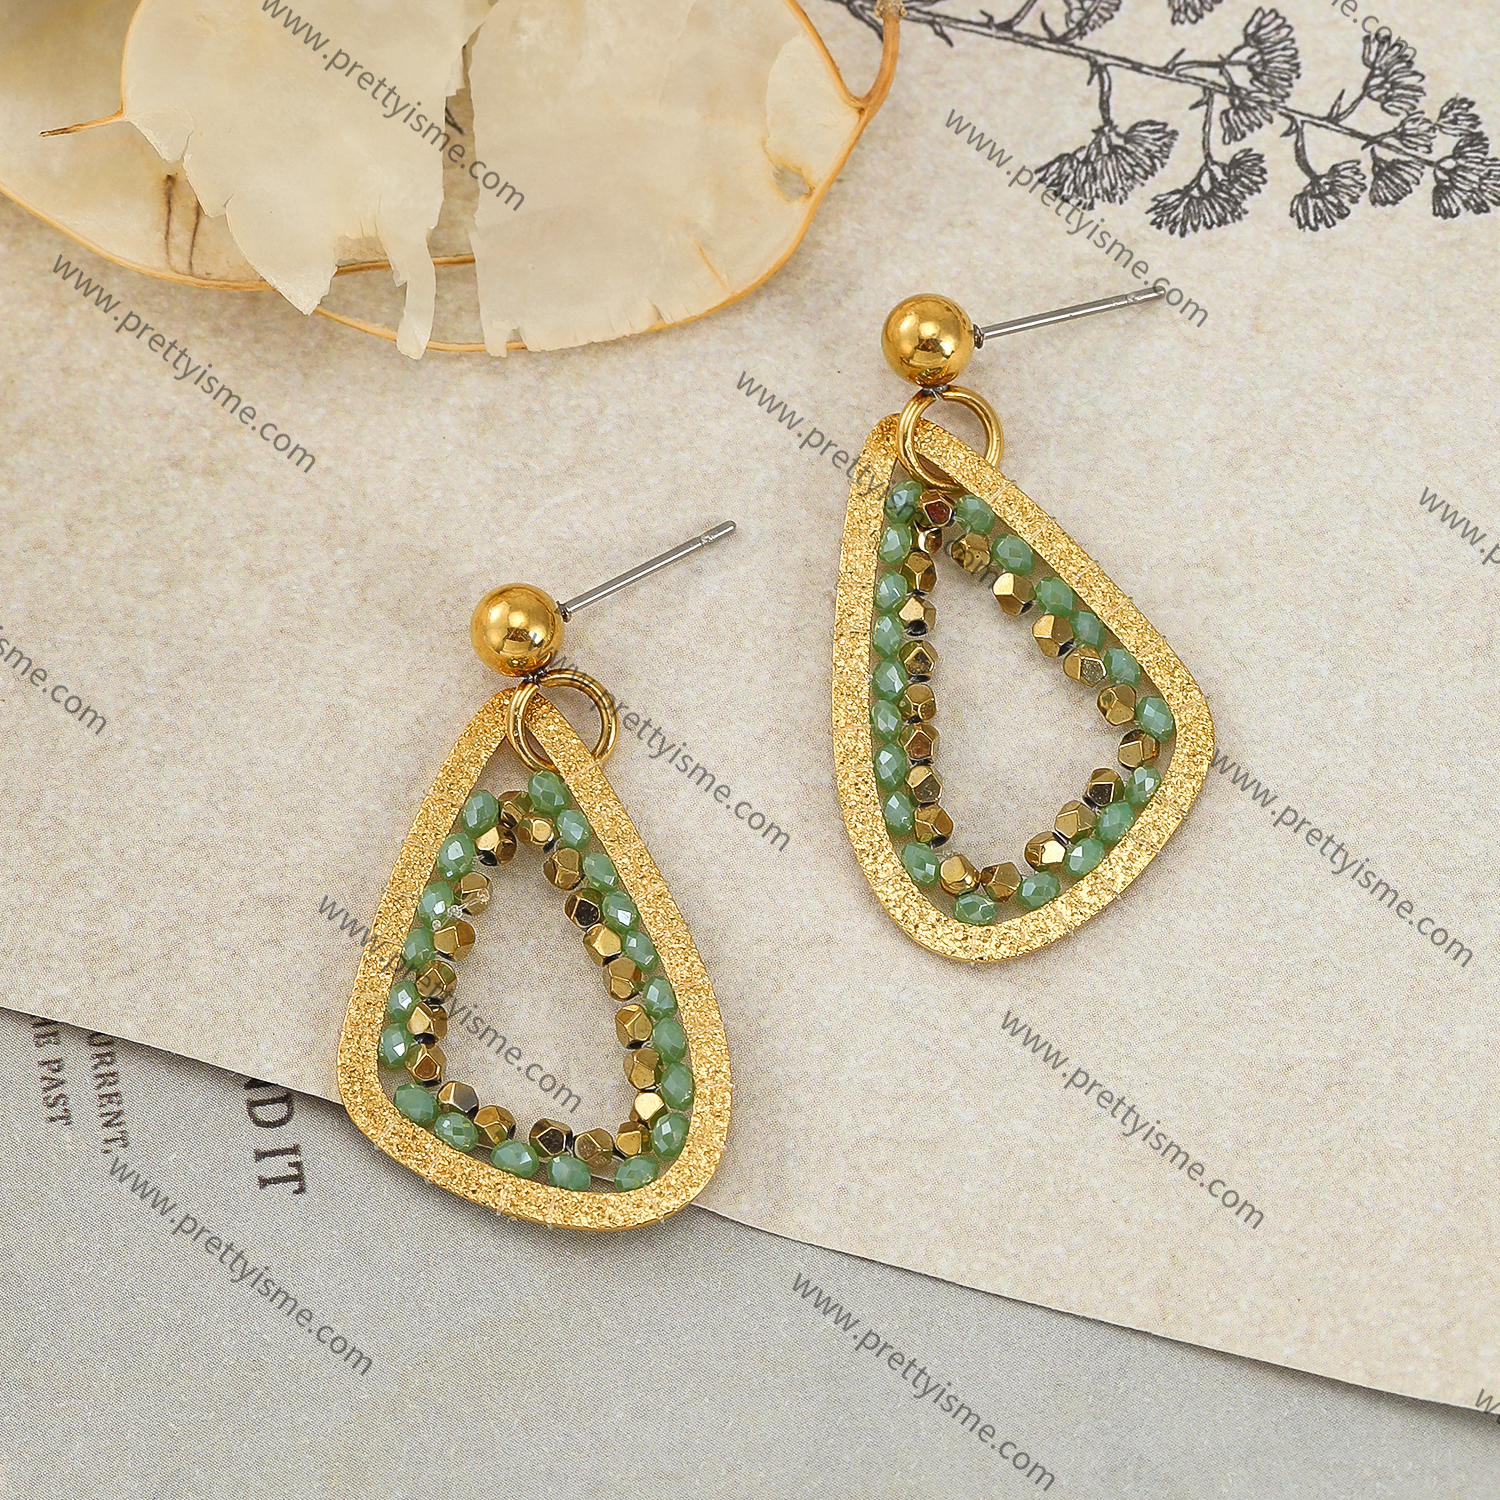 Oval Stainless Steel Earrings Gold Plated 18K with Green Beads (4).webp